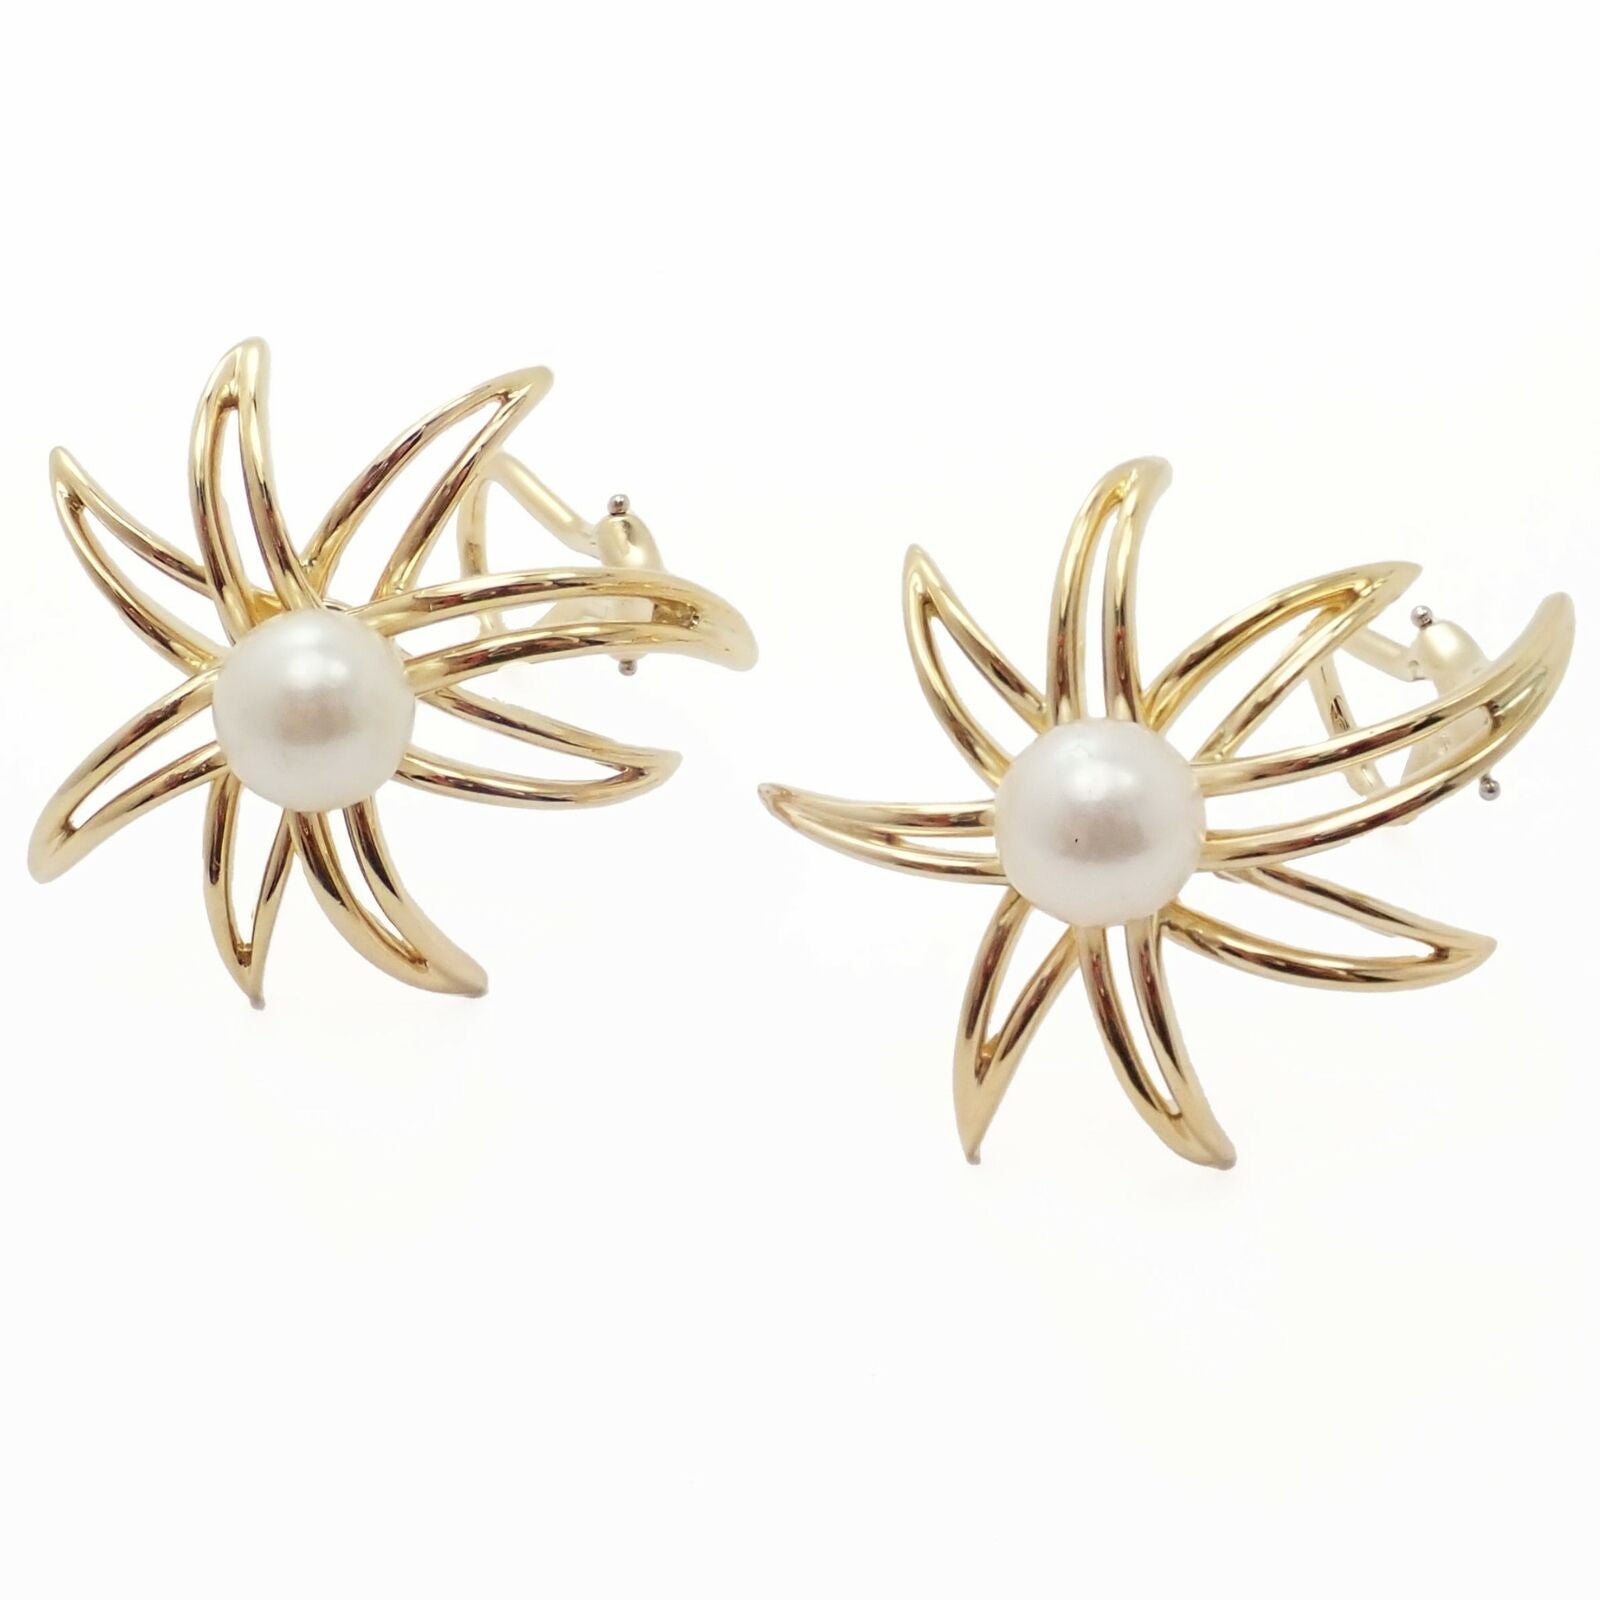 Tiffany & Co. Jewelry & Watches:Fine Jewelry:Earrings Authentic! Tiffany & Co 18k Yellow Gold Pearl Fireworks Earrings